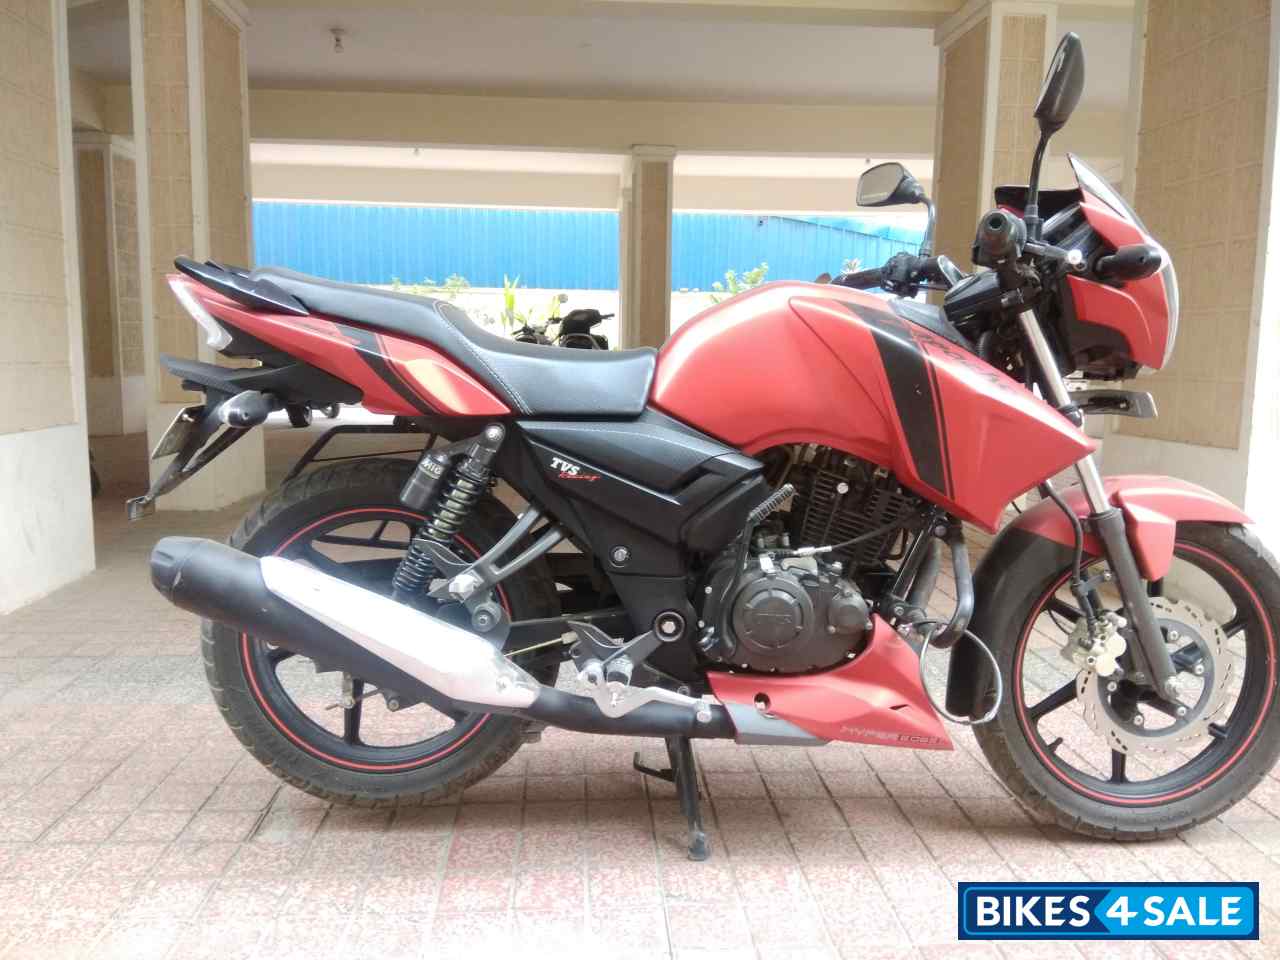 Used 18 Model Tvs Apache Rtr 160 For Sale In Hyderabad Id 2840 Matte Red Colour Bikes4sale